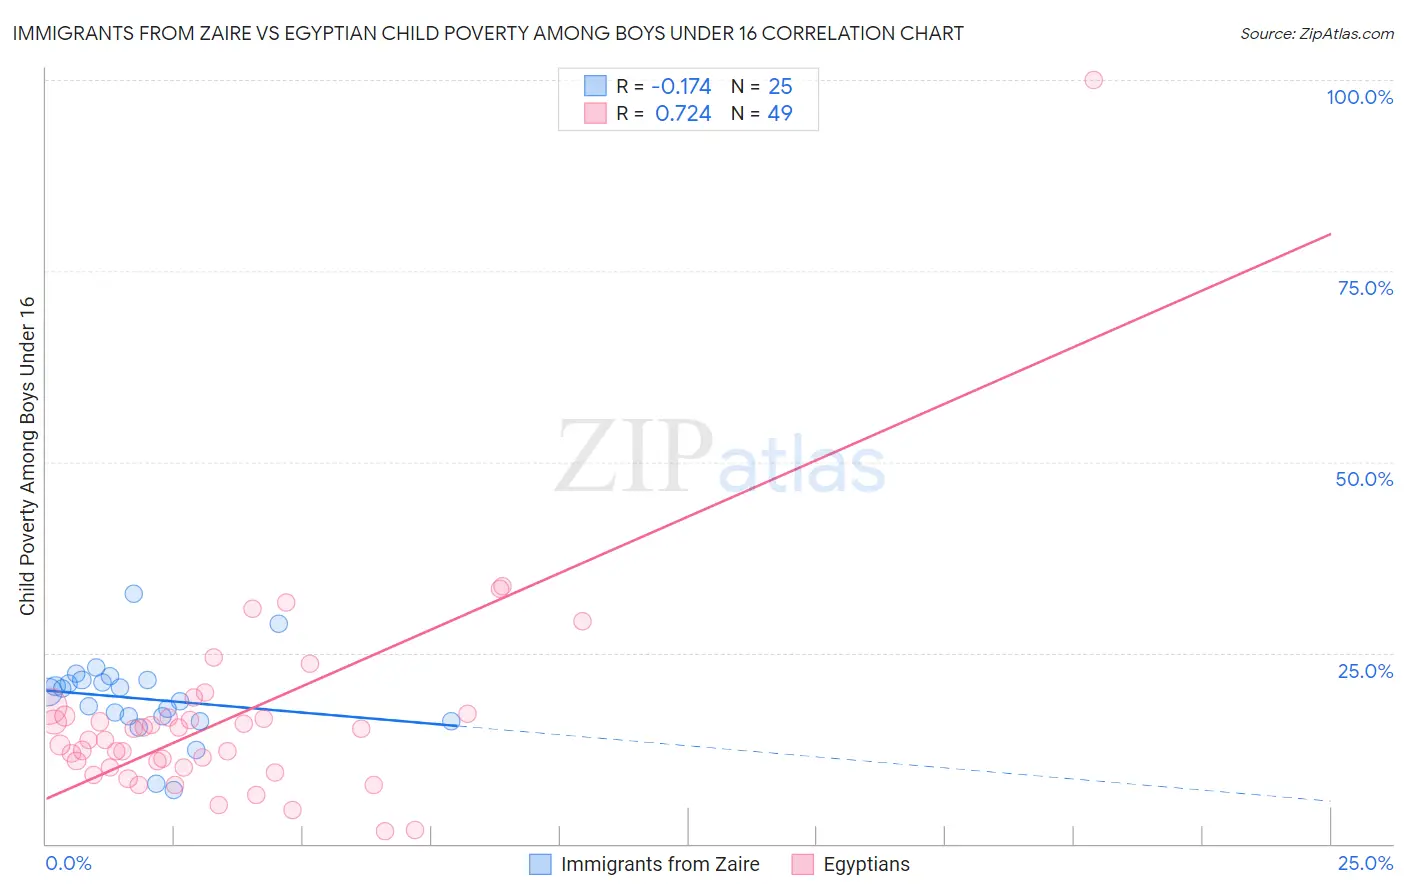 Immigrants from Zaire vs Egyptian Child Poverty Among Boys Under 16